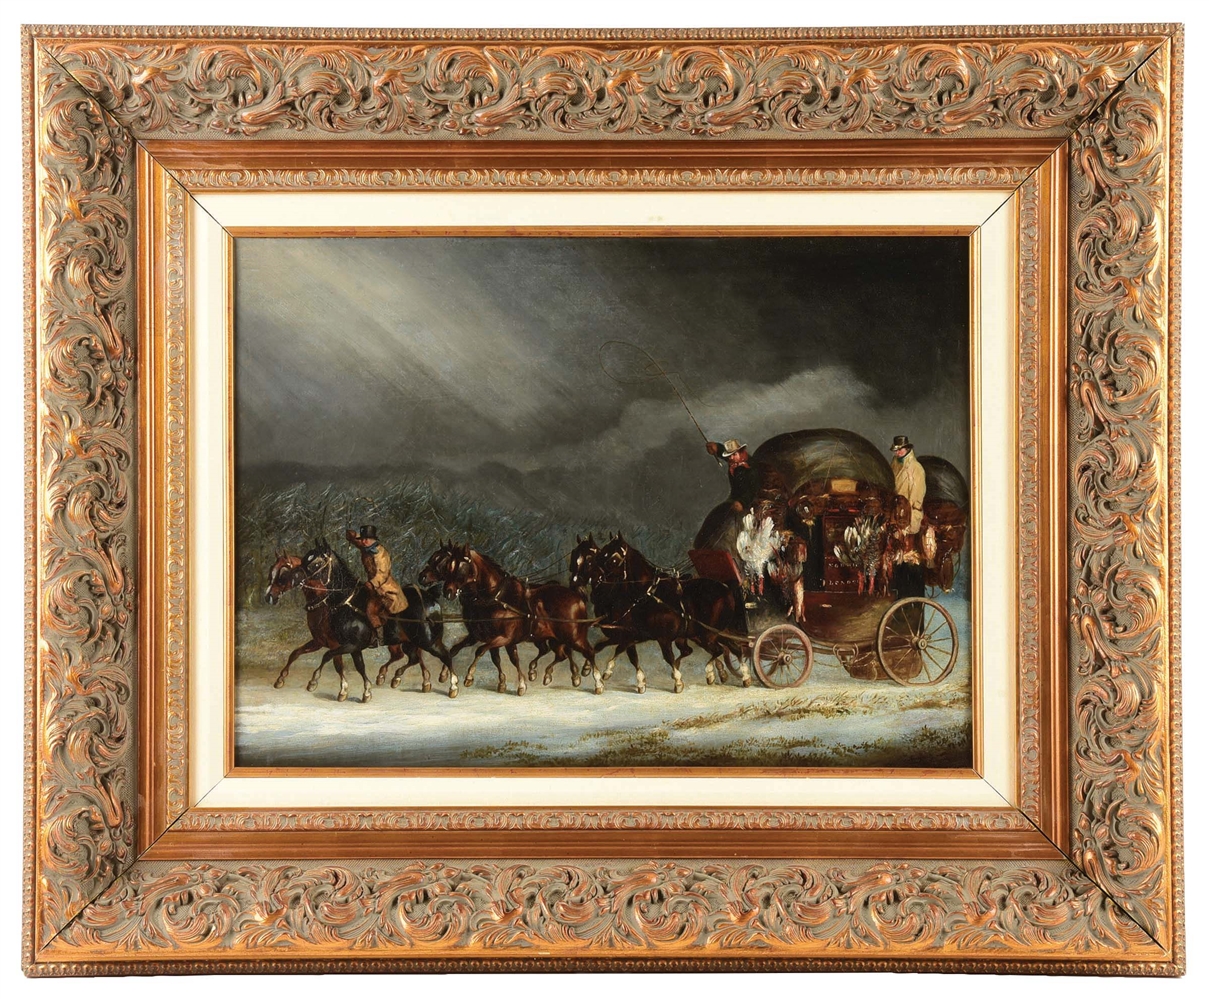 ATTRIB. TO: HENRY THOMAS ALKEN (BRITISH, 1785-1851) "RETURNING WITH THE SPOILS OF A WINTER HUNT".